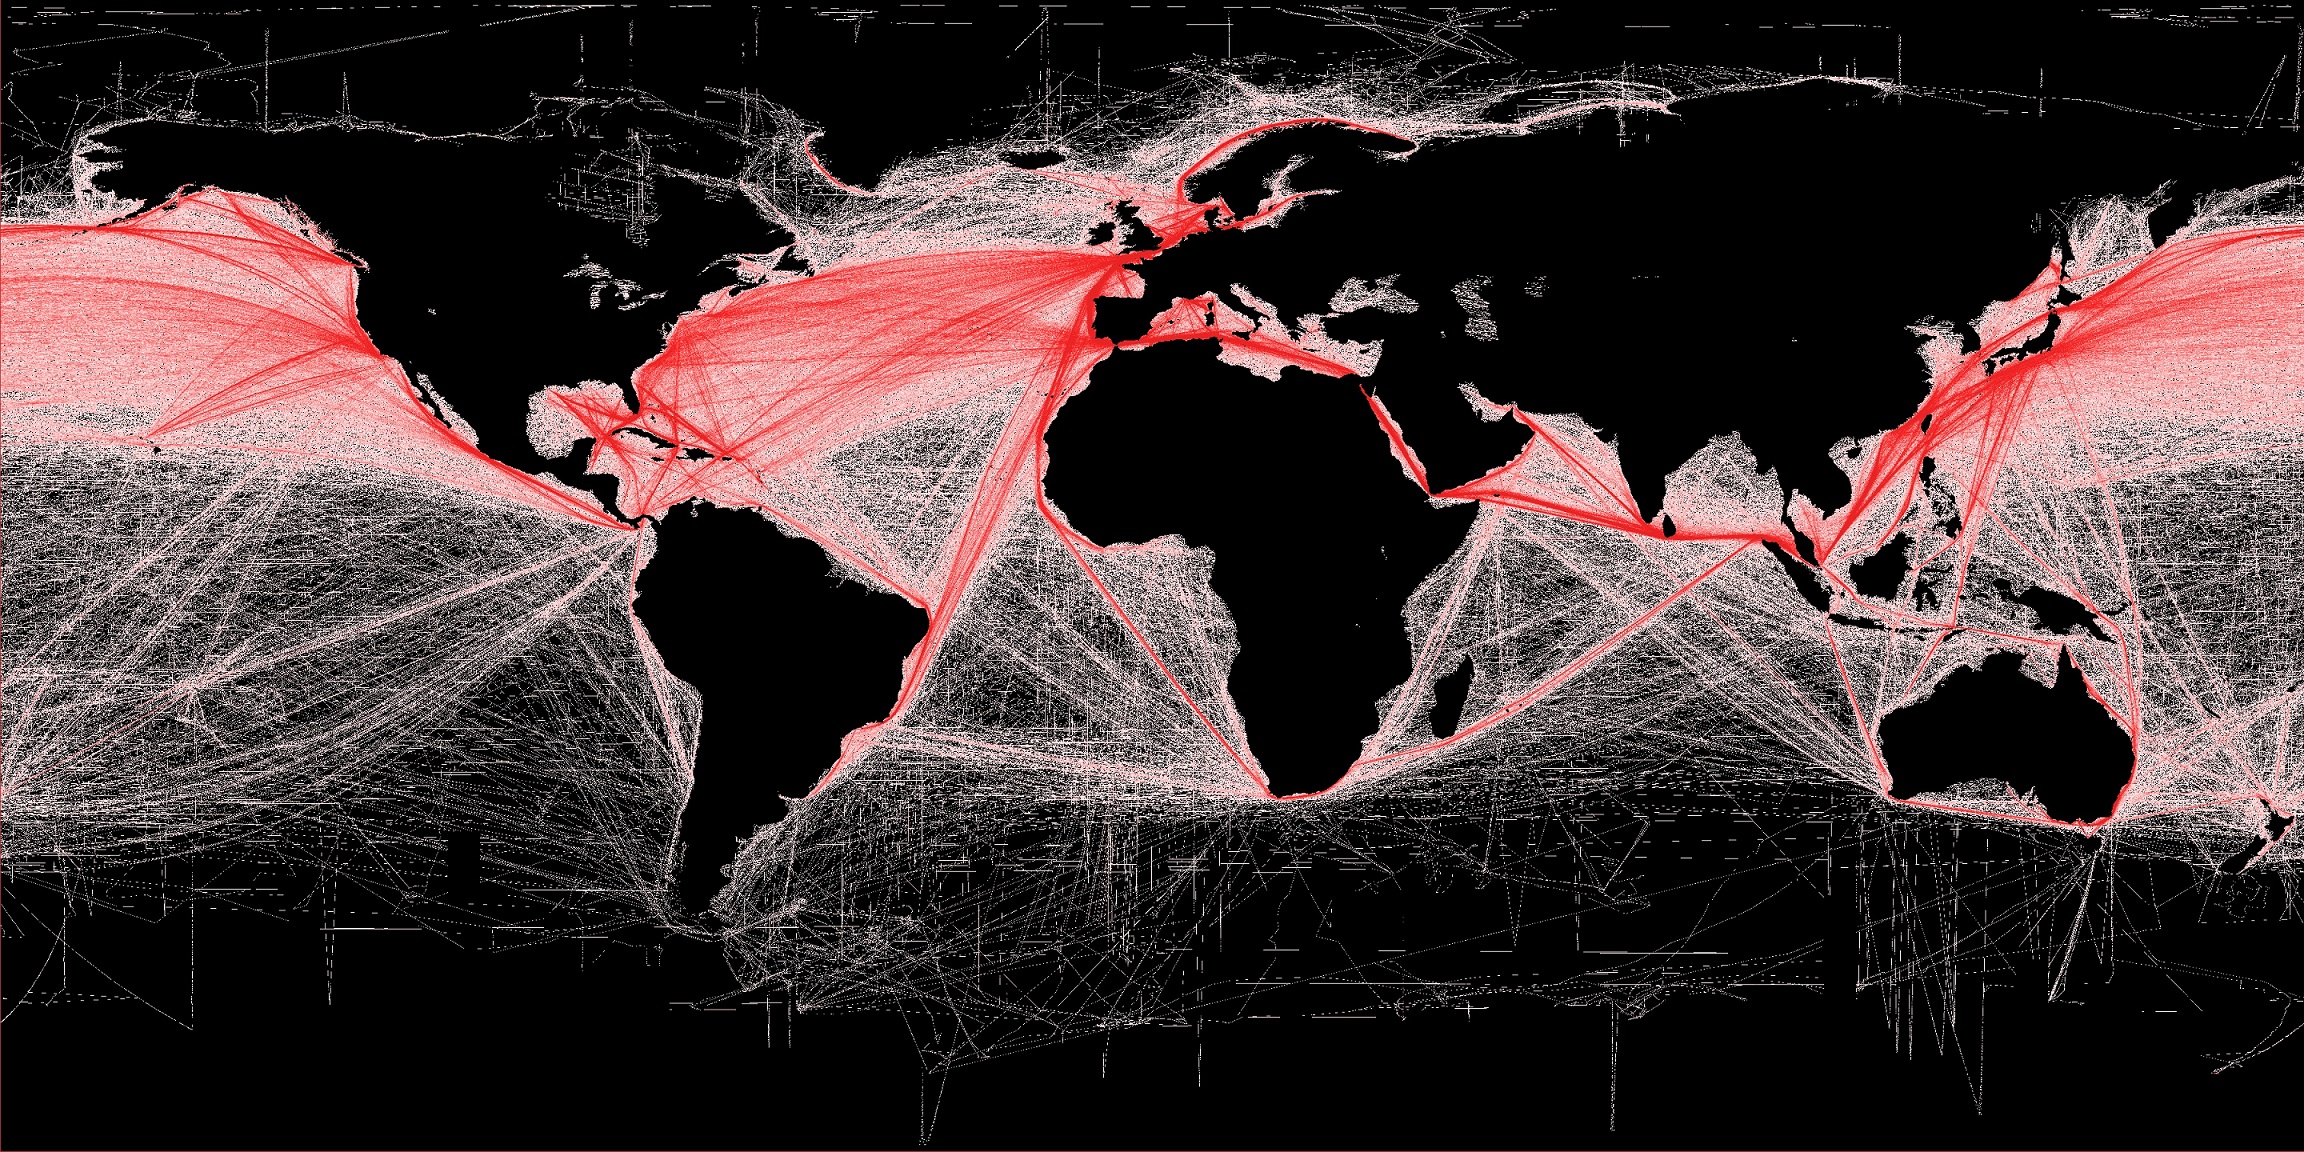 Digital communication between ships could help optimise shipping routes